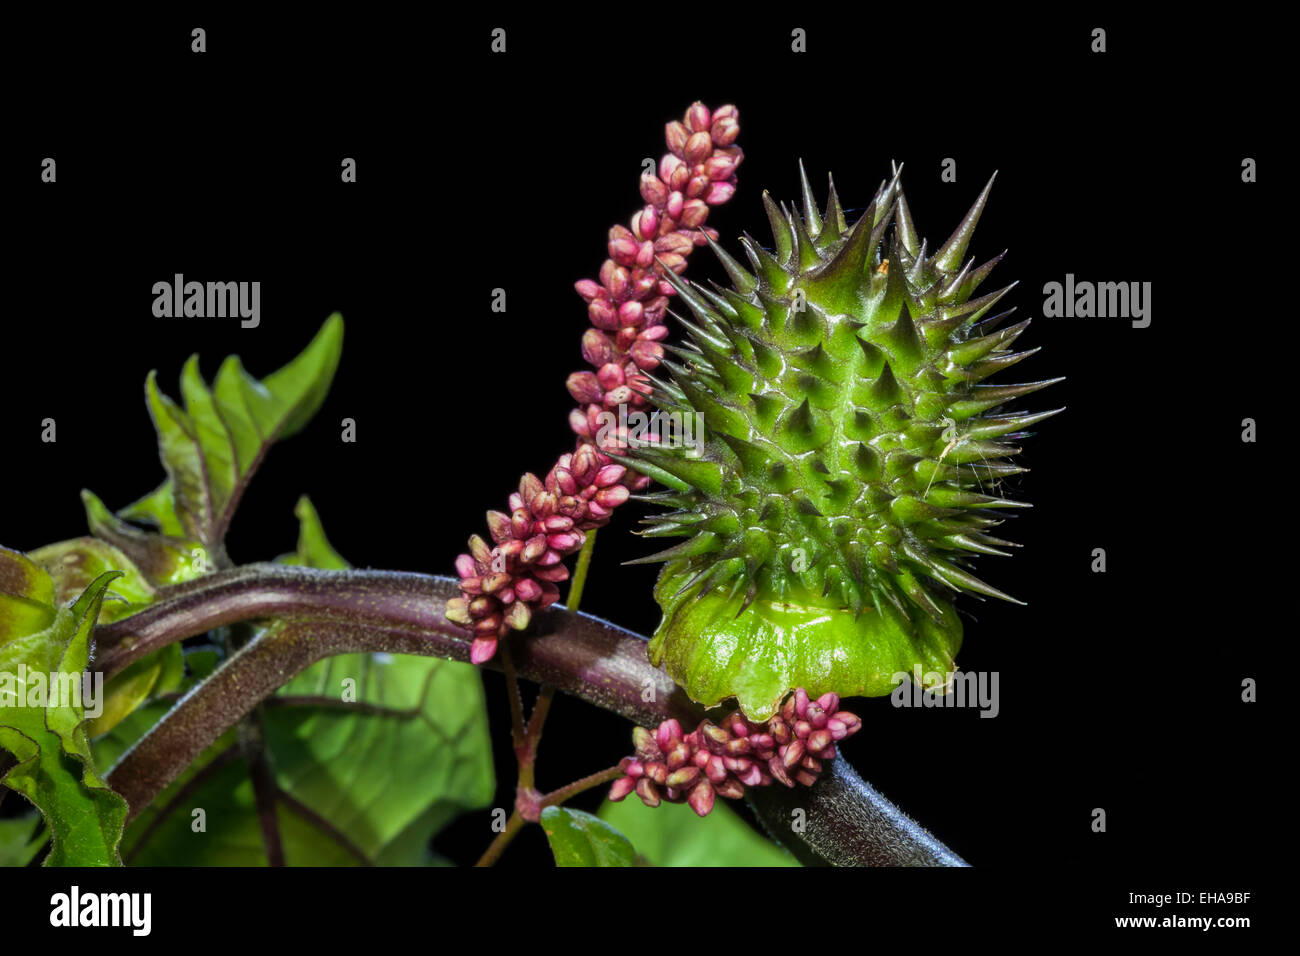 Macro shot of a spiky green plant and a green flower. Stock Photo